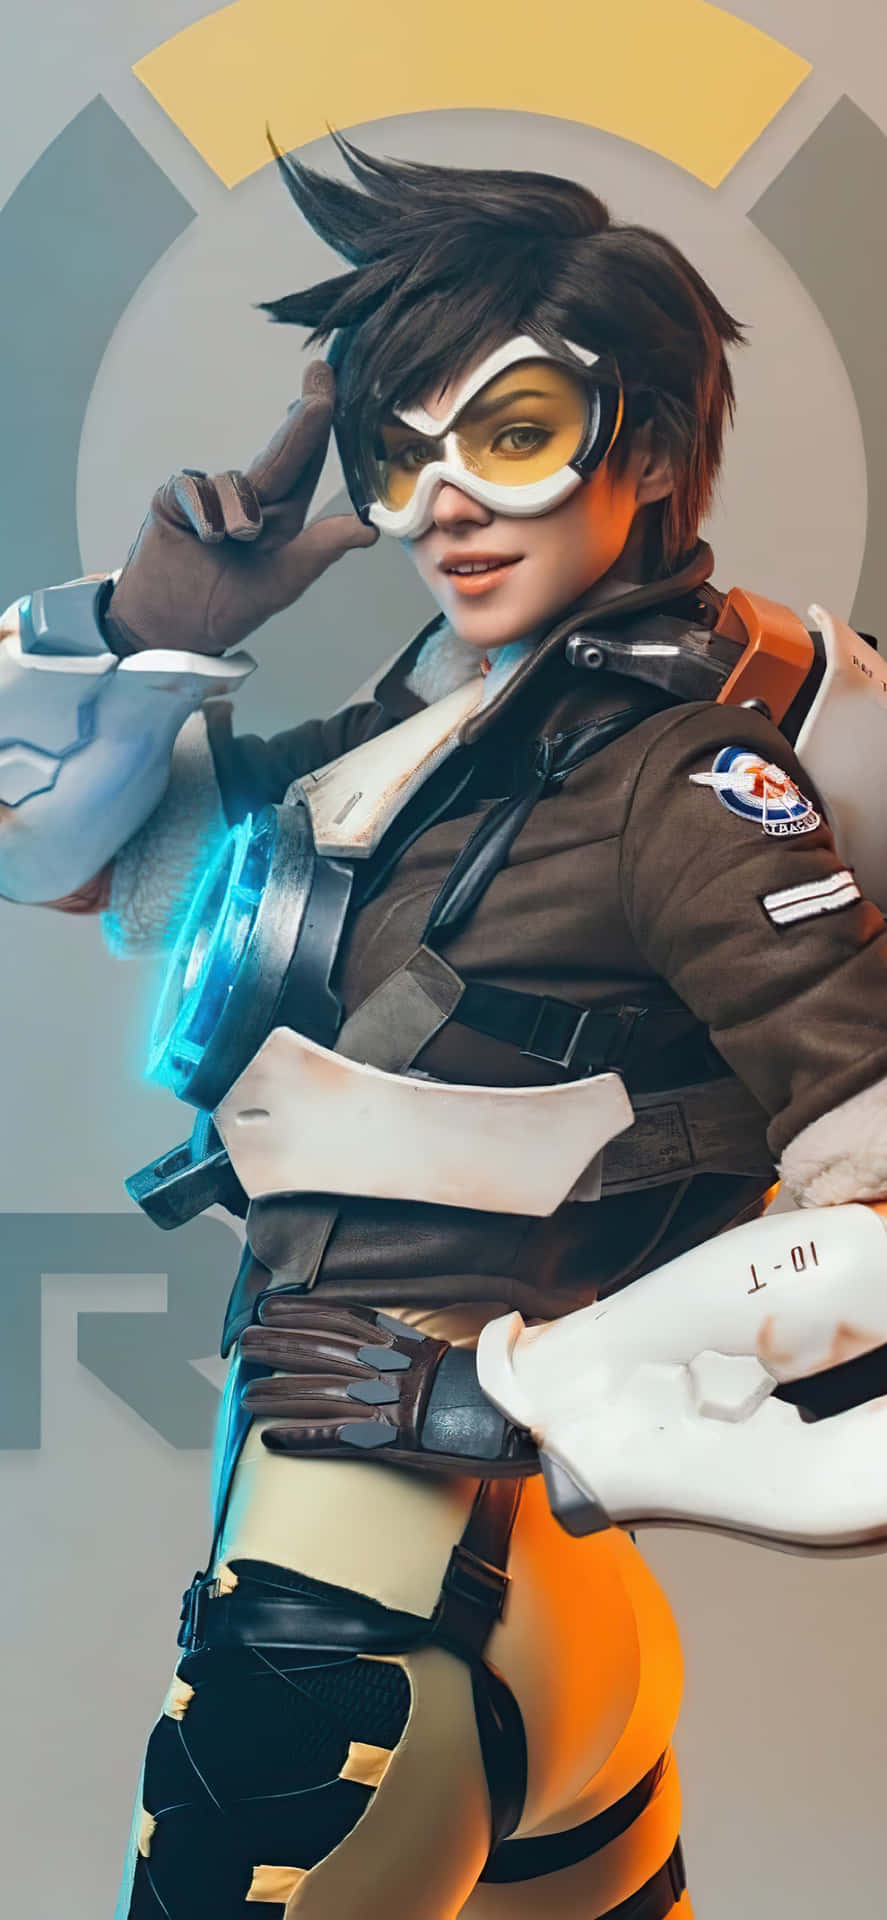 Iphone Xs Max Overwatch Background Tracer Turned To Face Camera Background